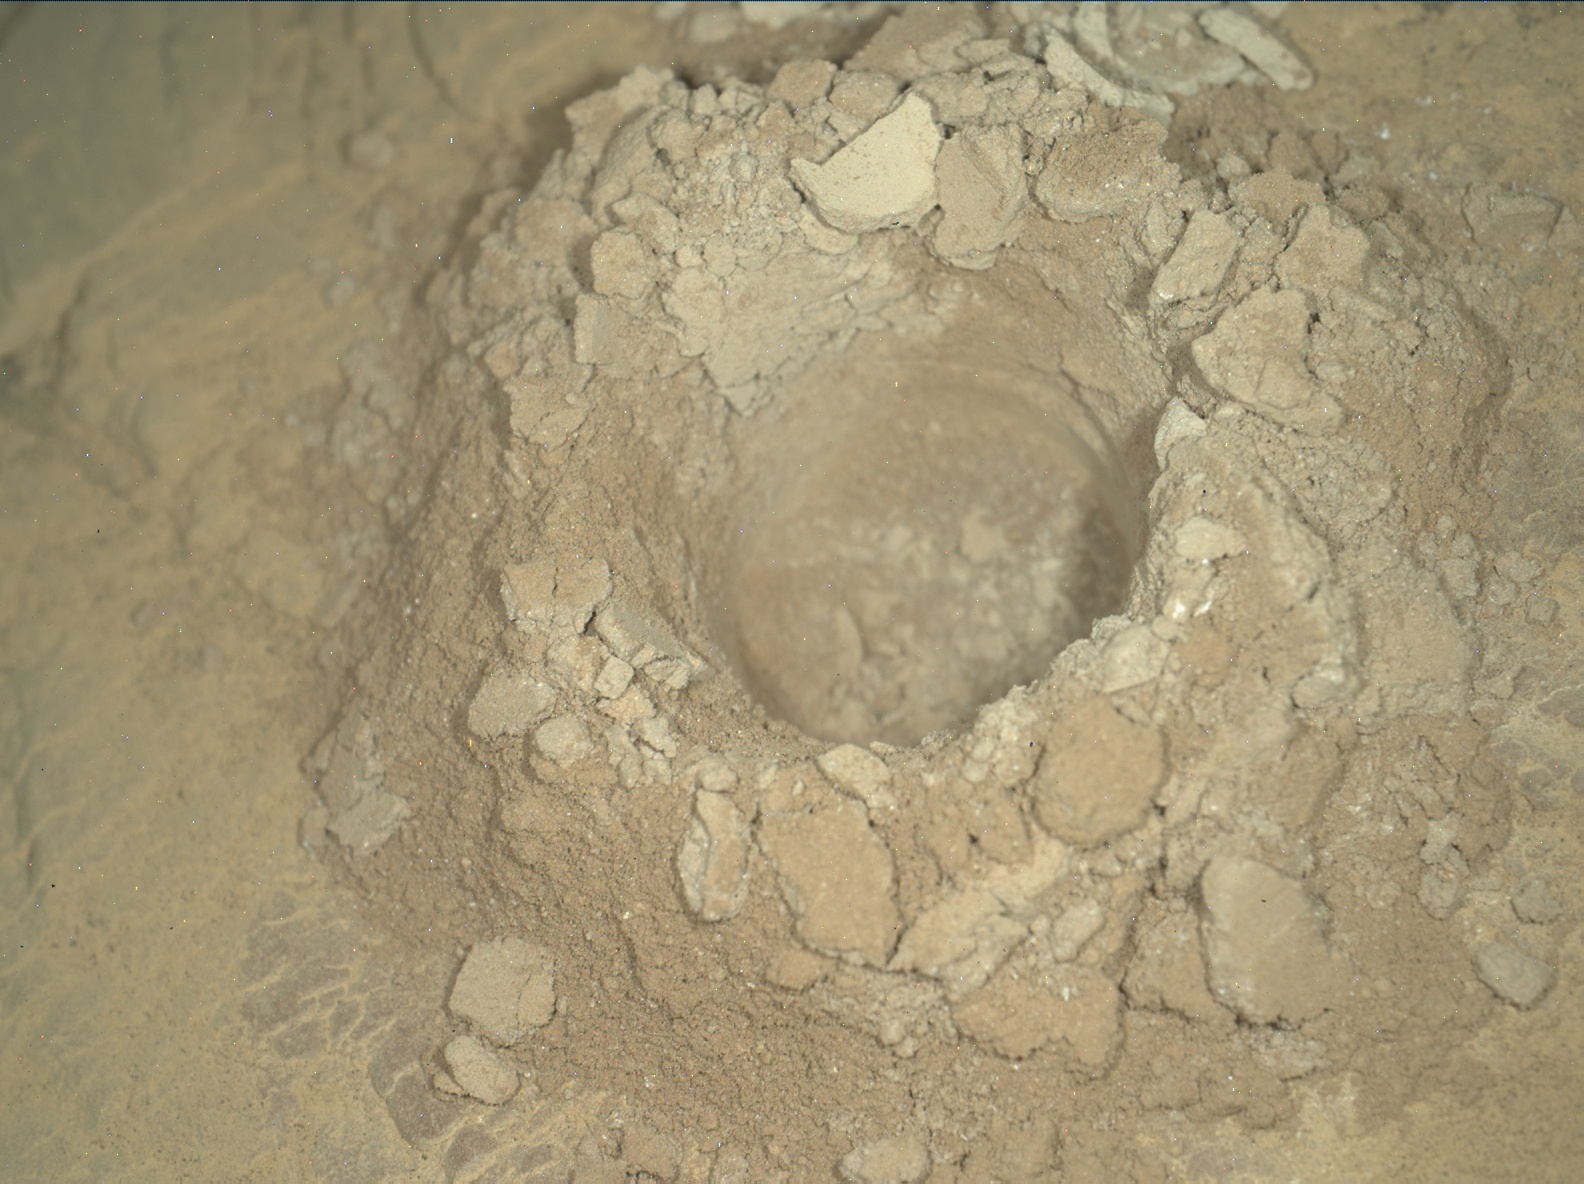 Nasa's Mars rover Curiosity acquired this image using its Mars Hand Lens Imager (MAHLI) on Sol 2551